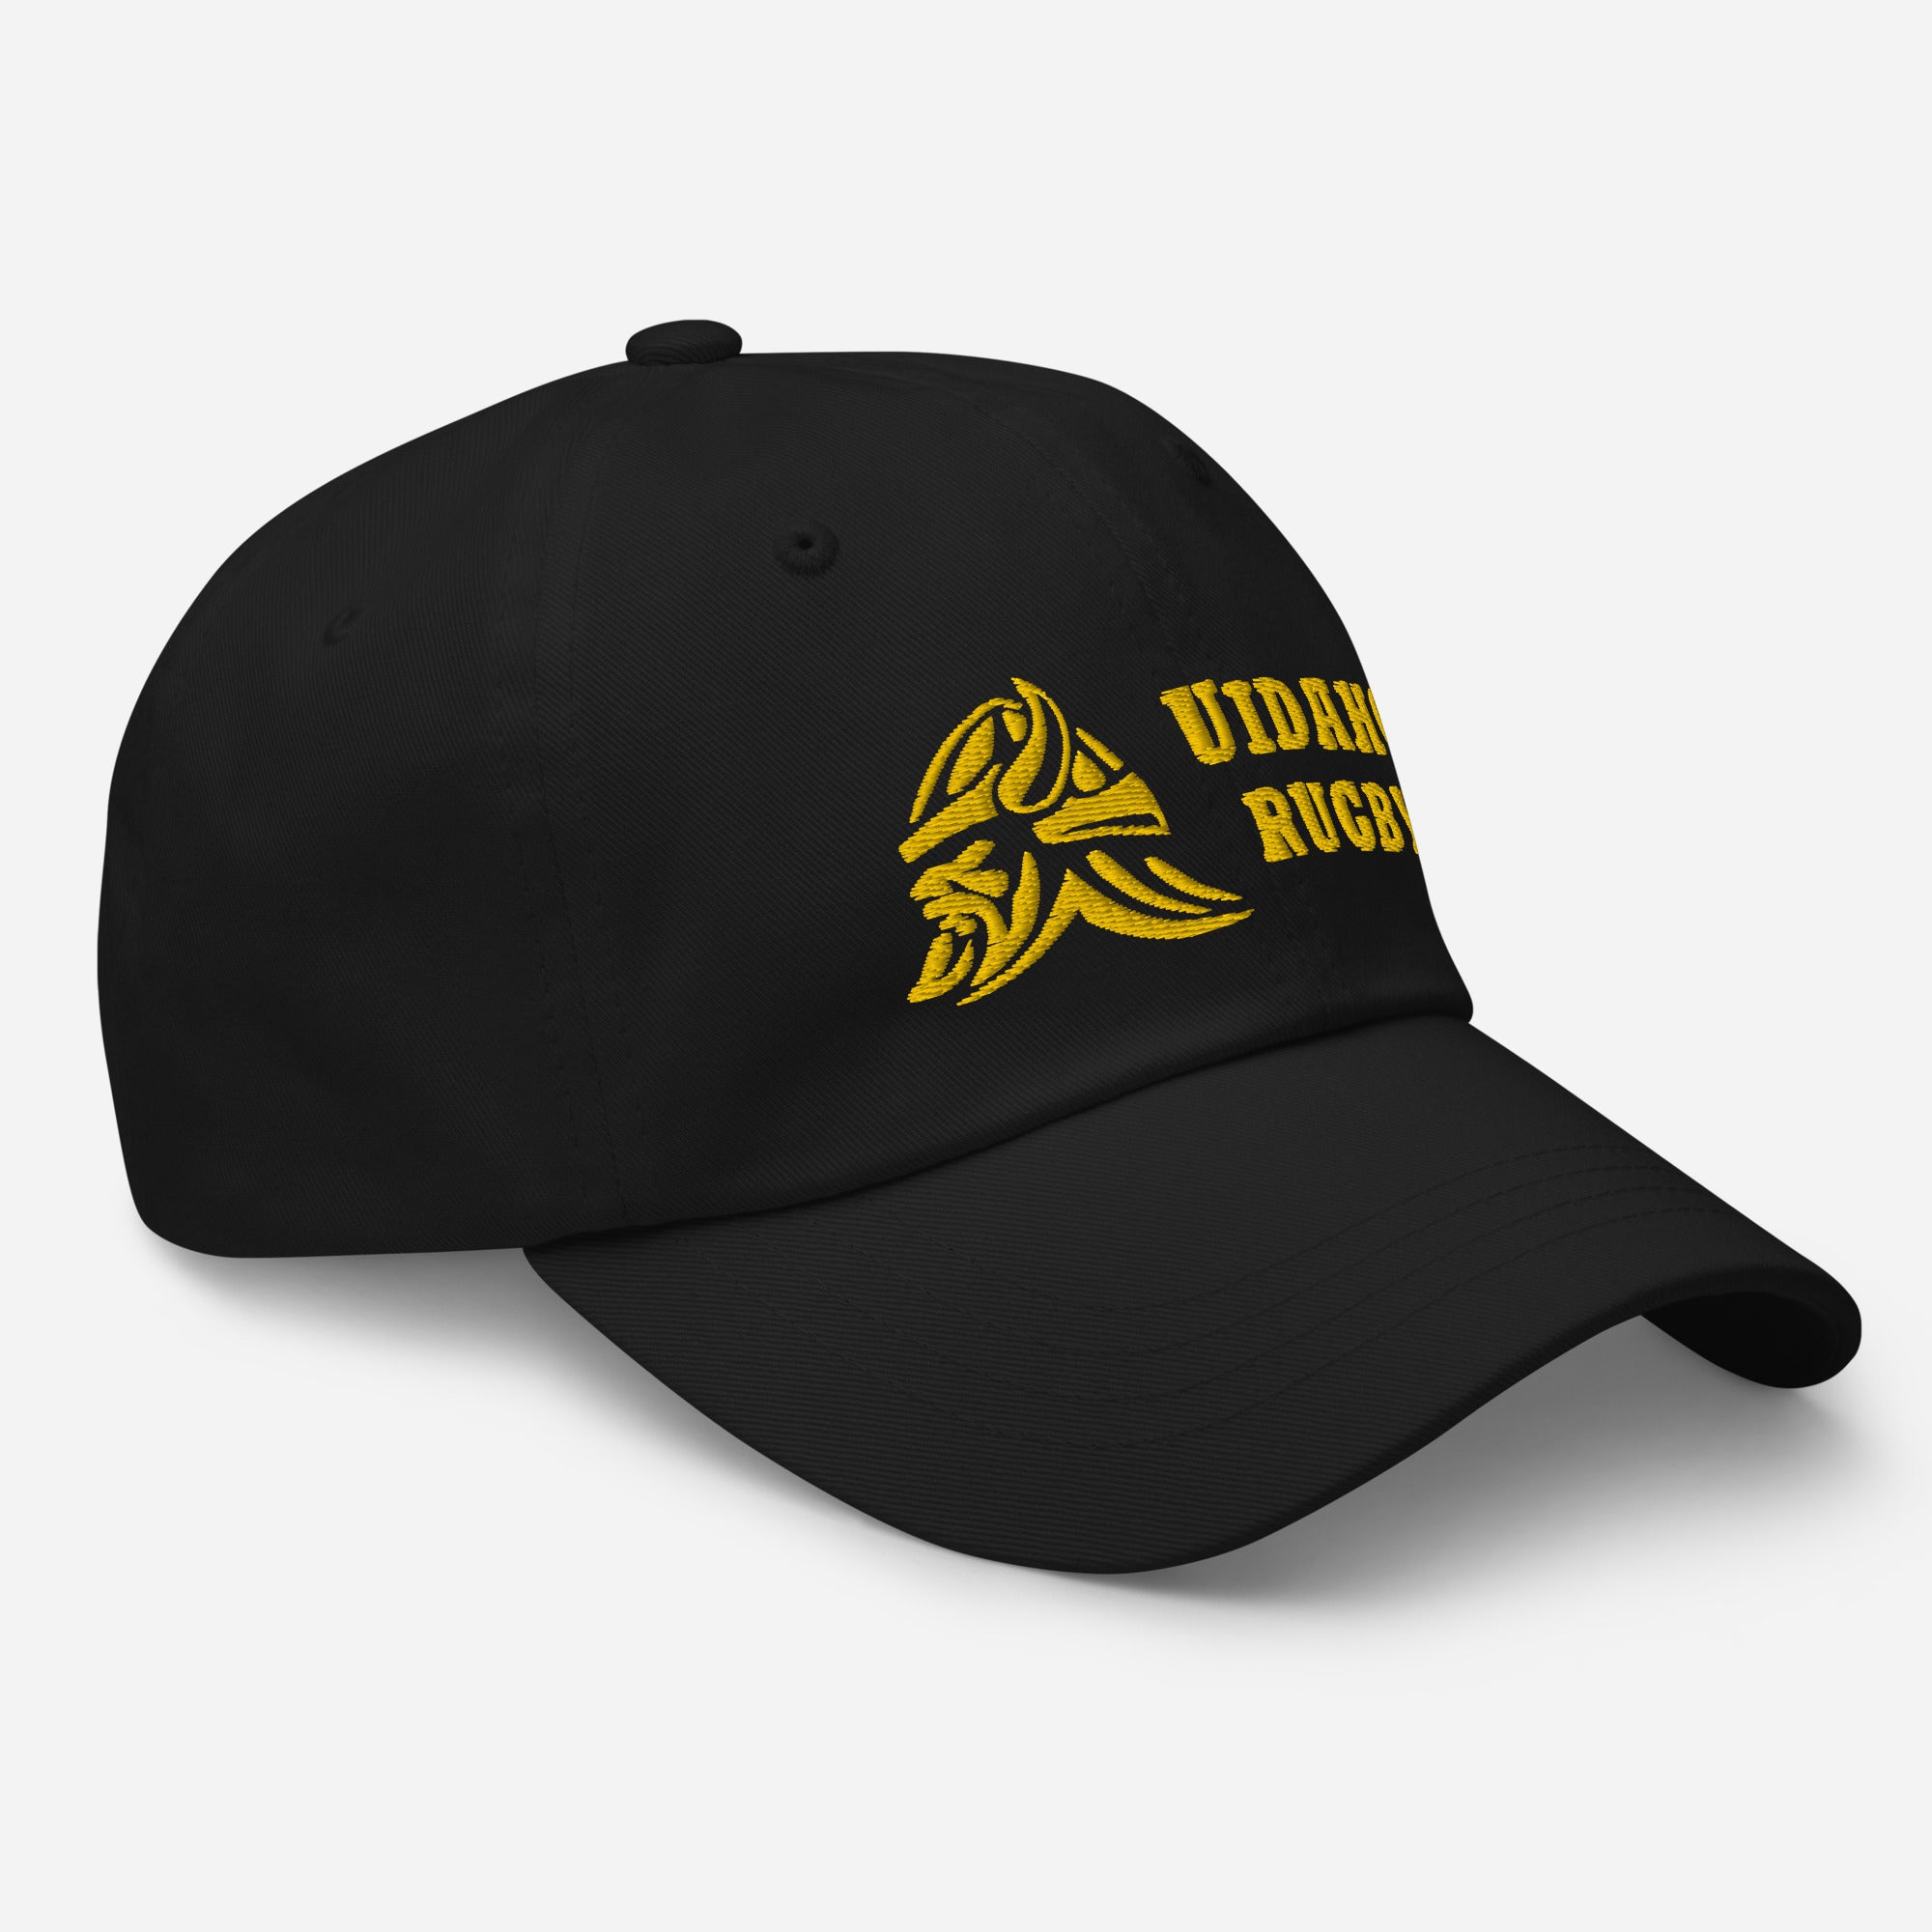 Rugby Imports University of Idaho Rugby Adjustable Hat